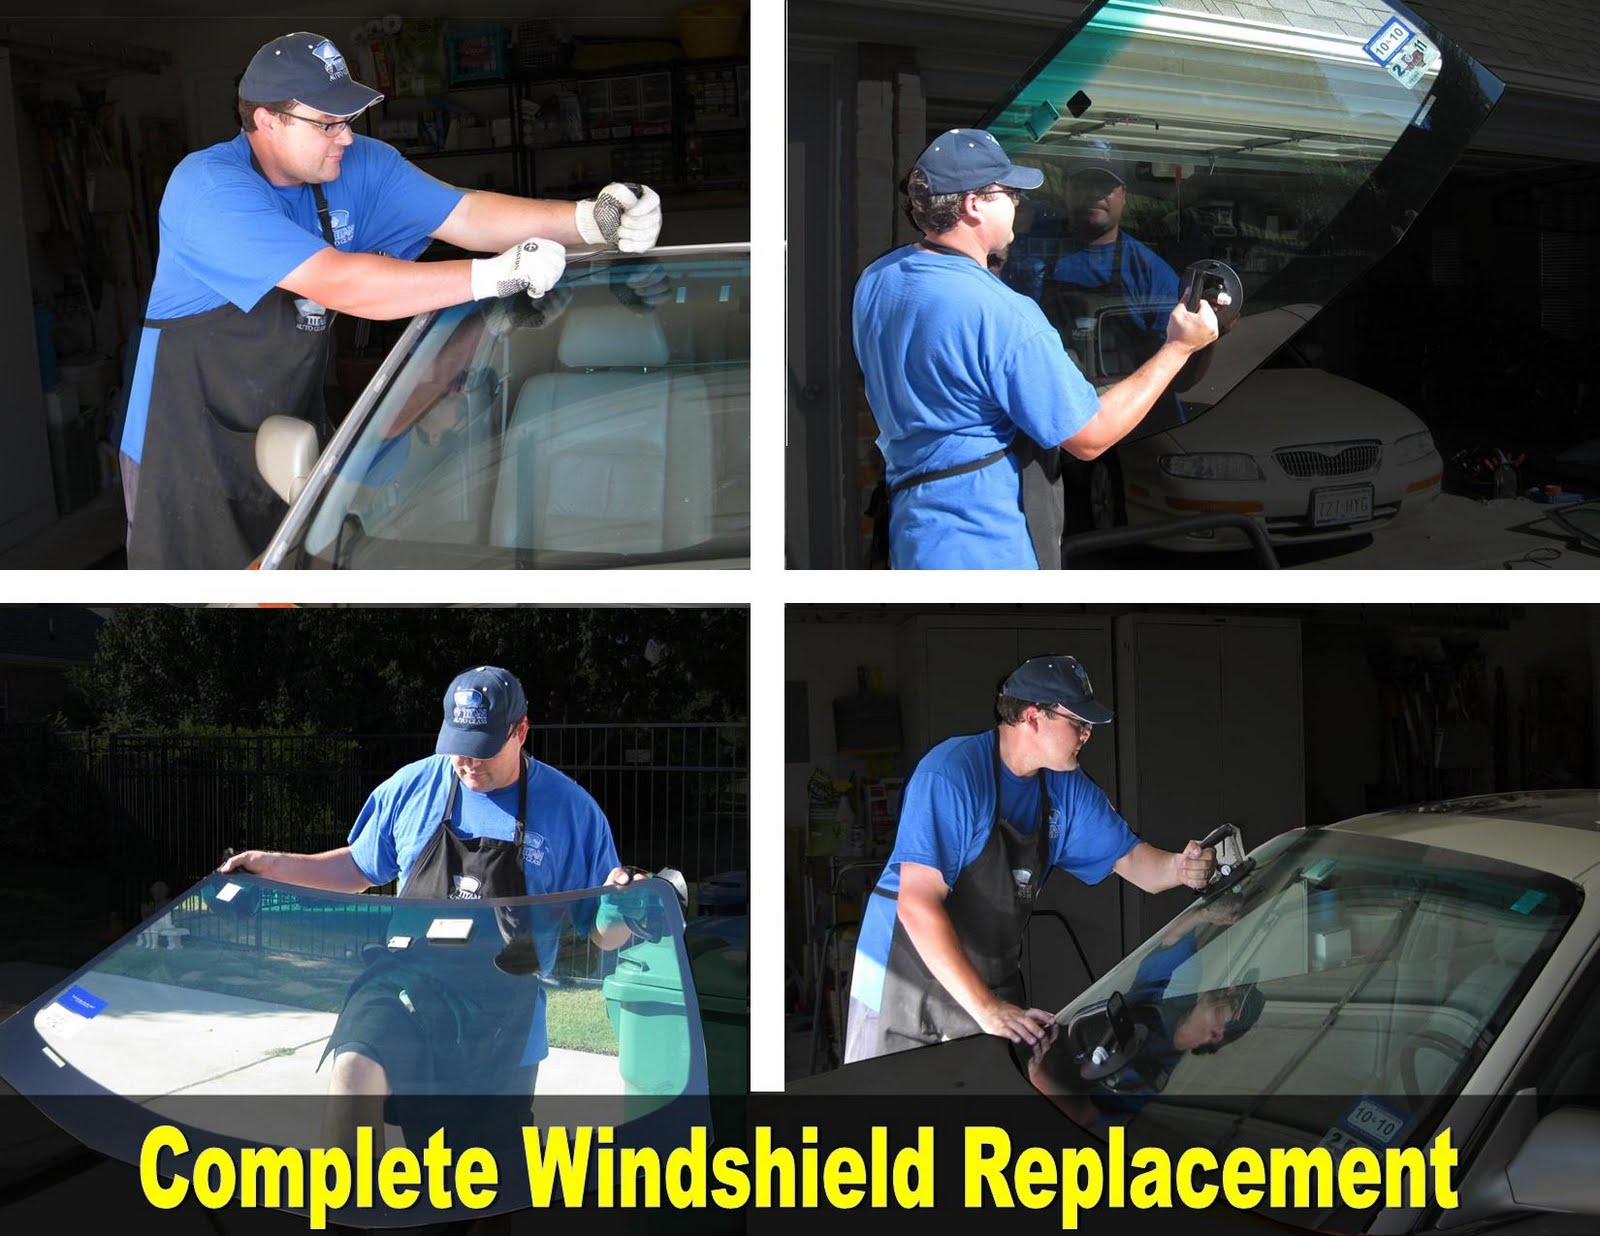 How can you save on auto glass replacement?